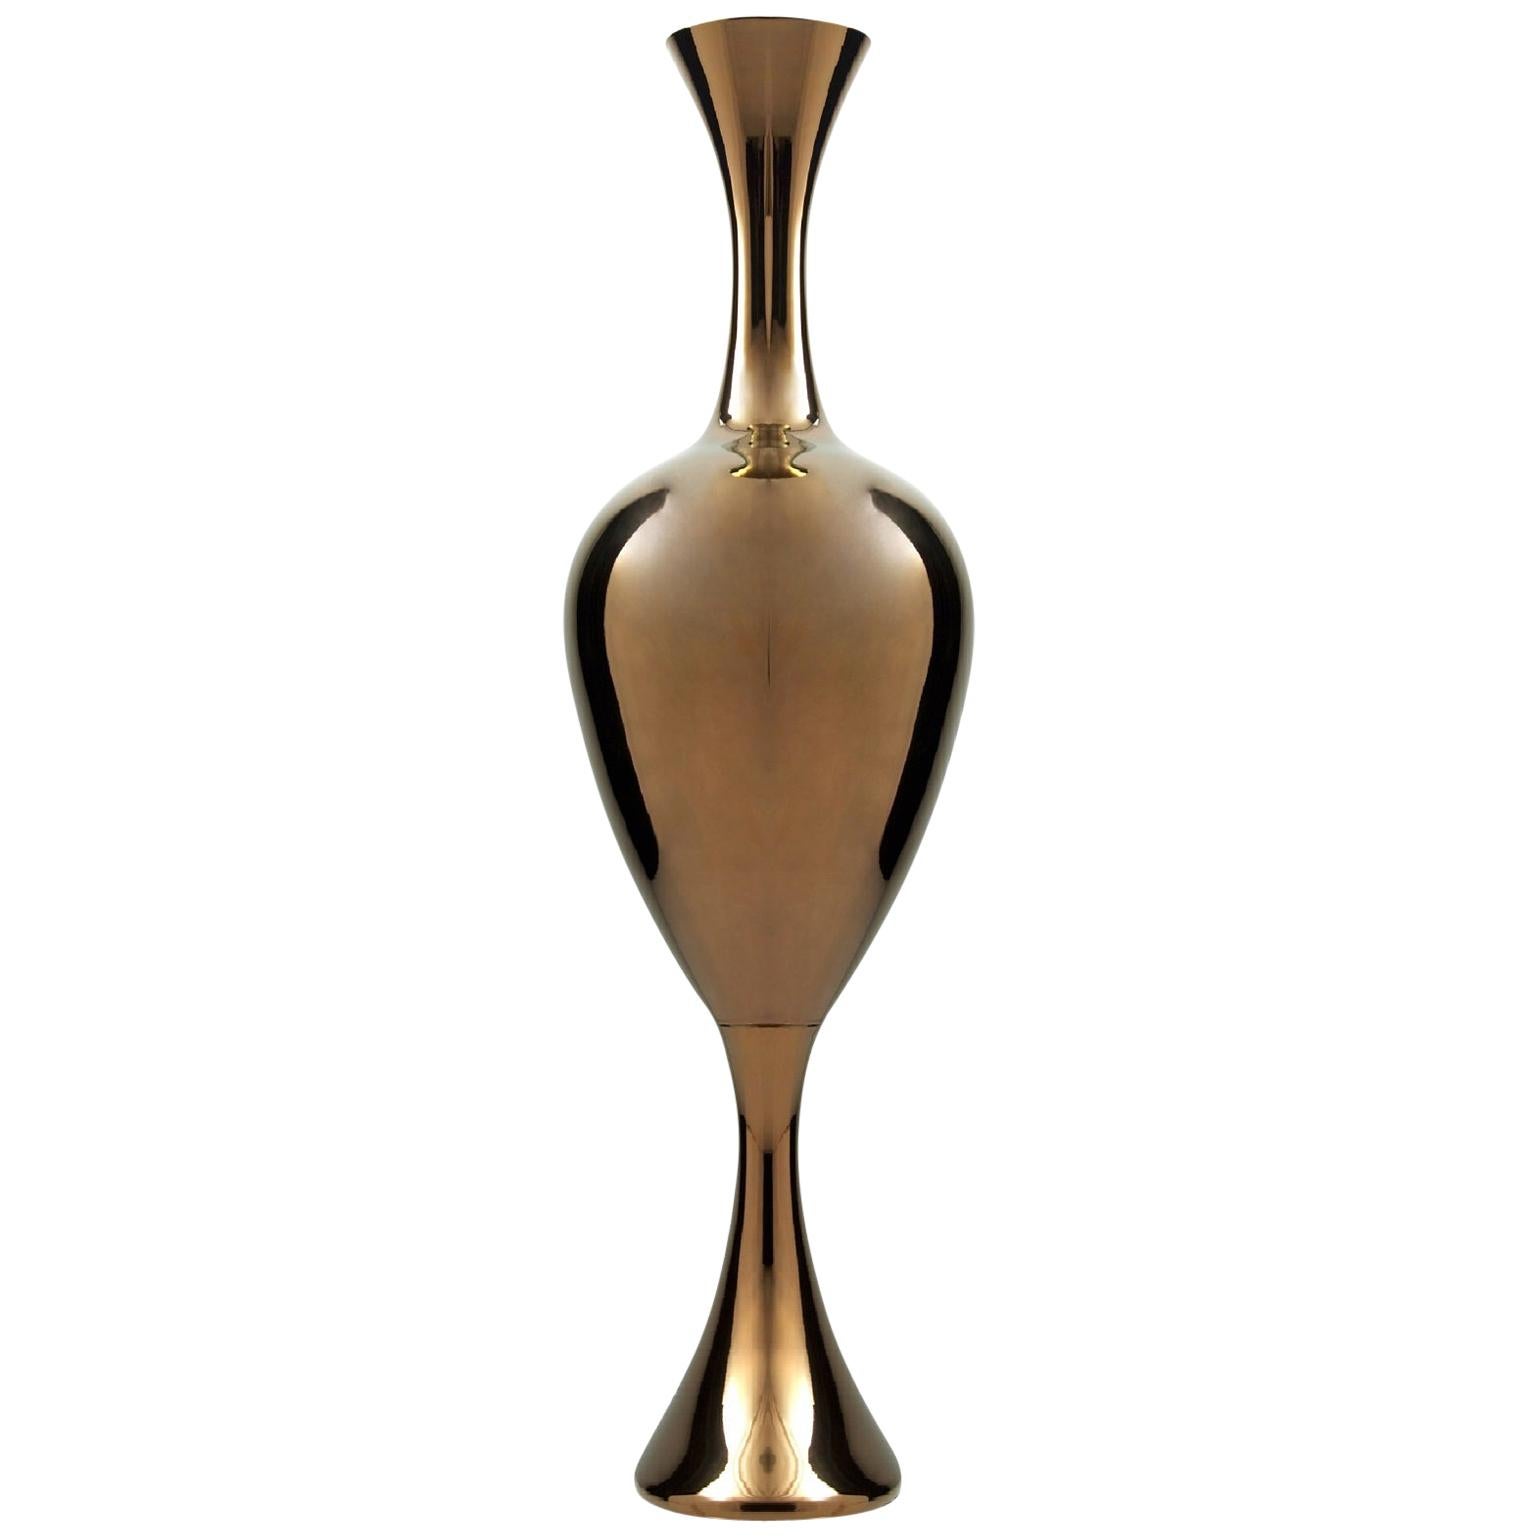 Ceramic Vase "EVE-L" Handcrafted in Bronze by Gabriella B. Made in Italy